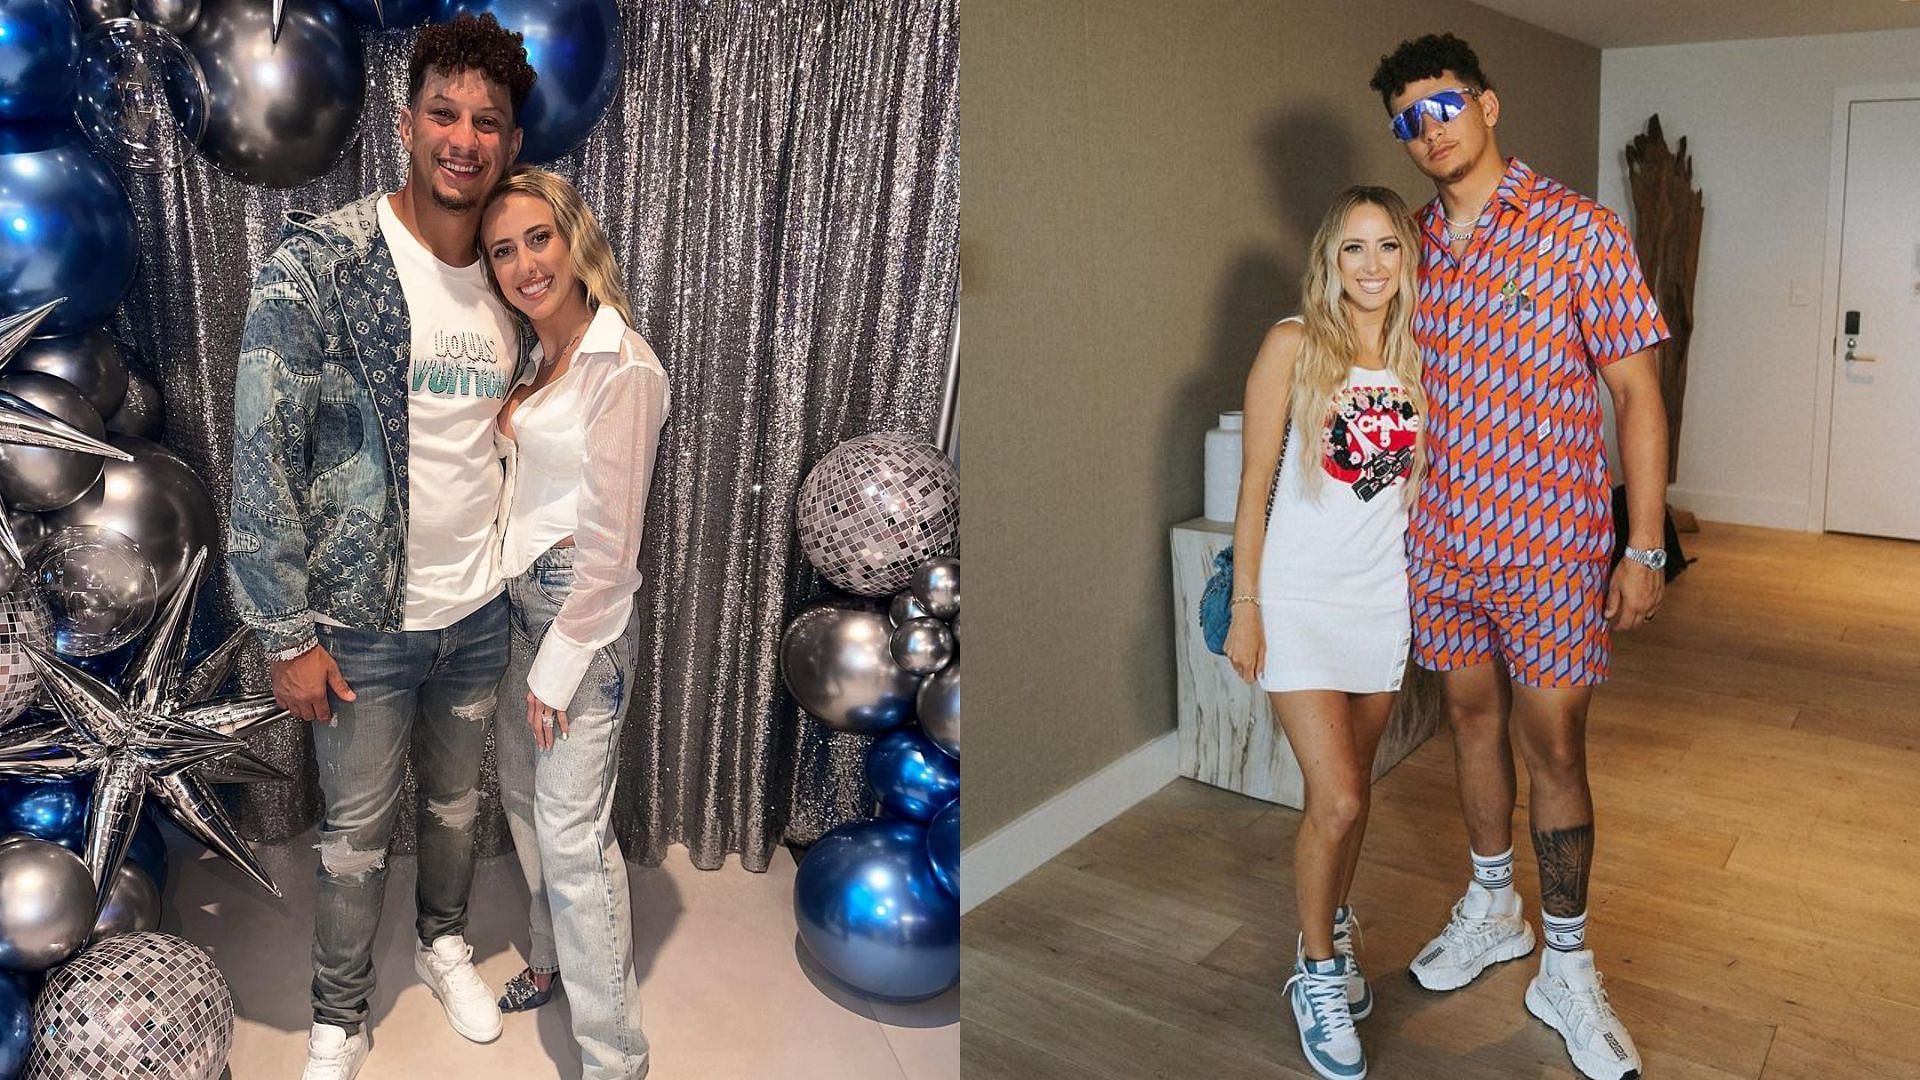 Patrick Mahomes shares adorable photo dump on wife Brittany